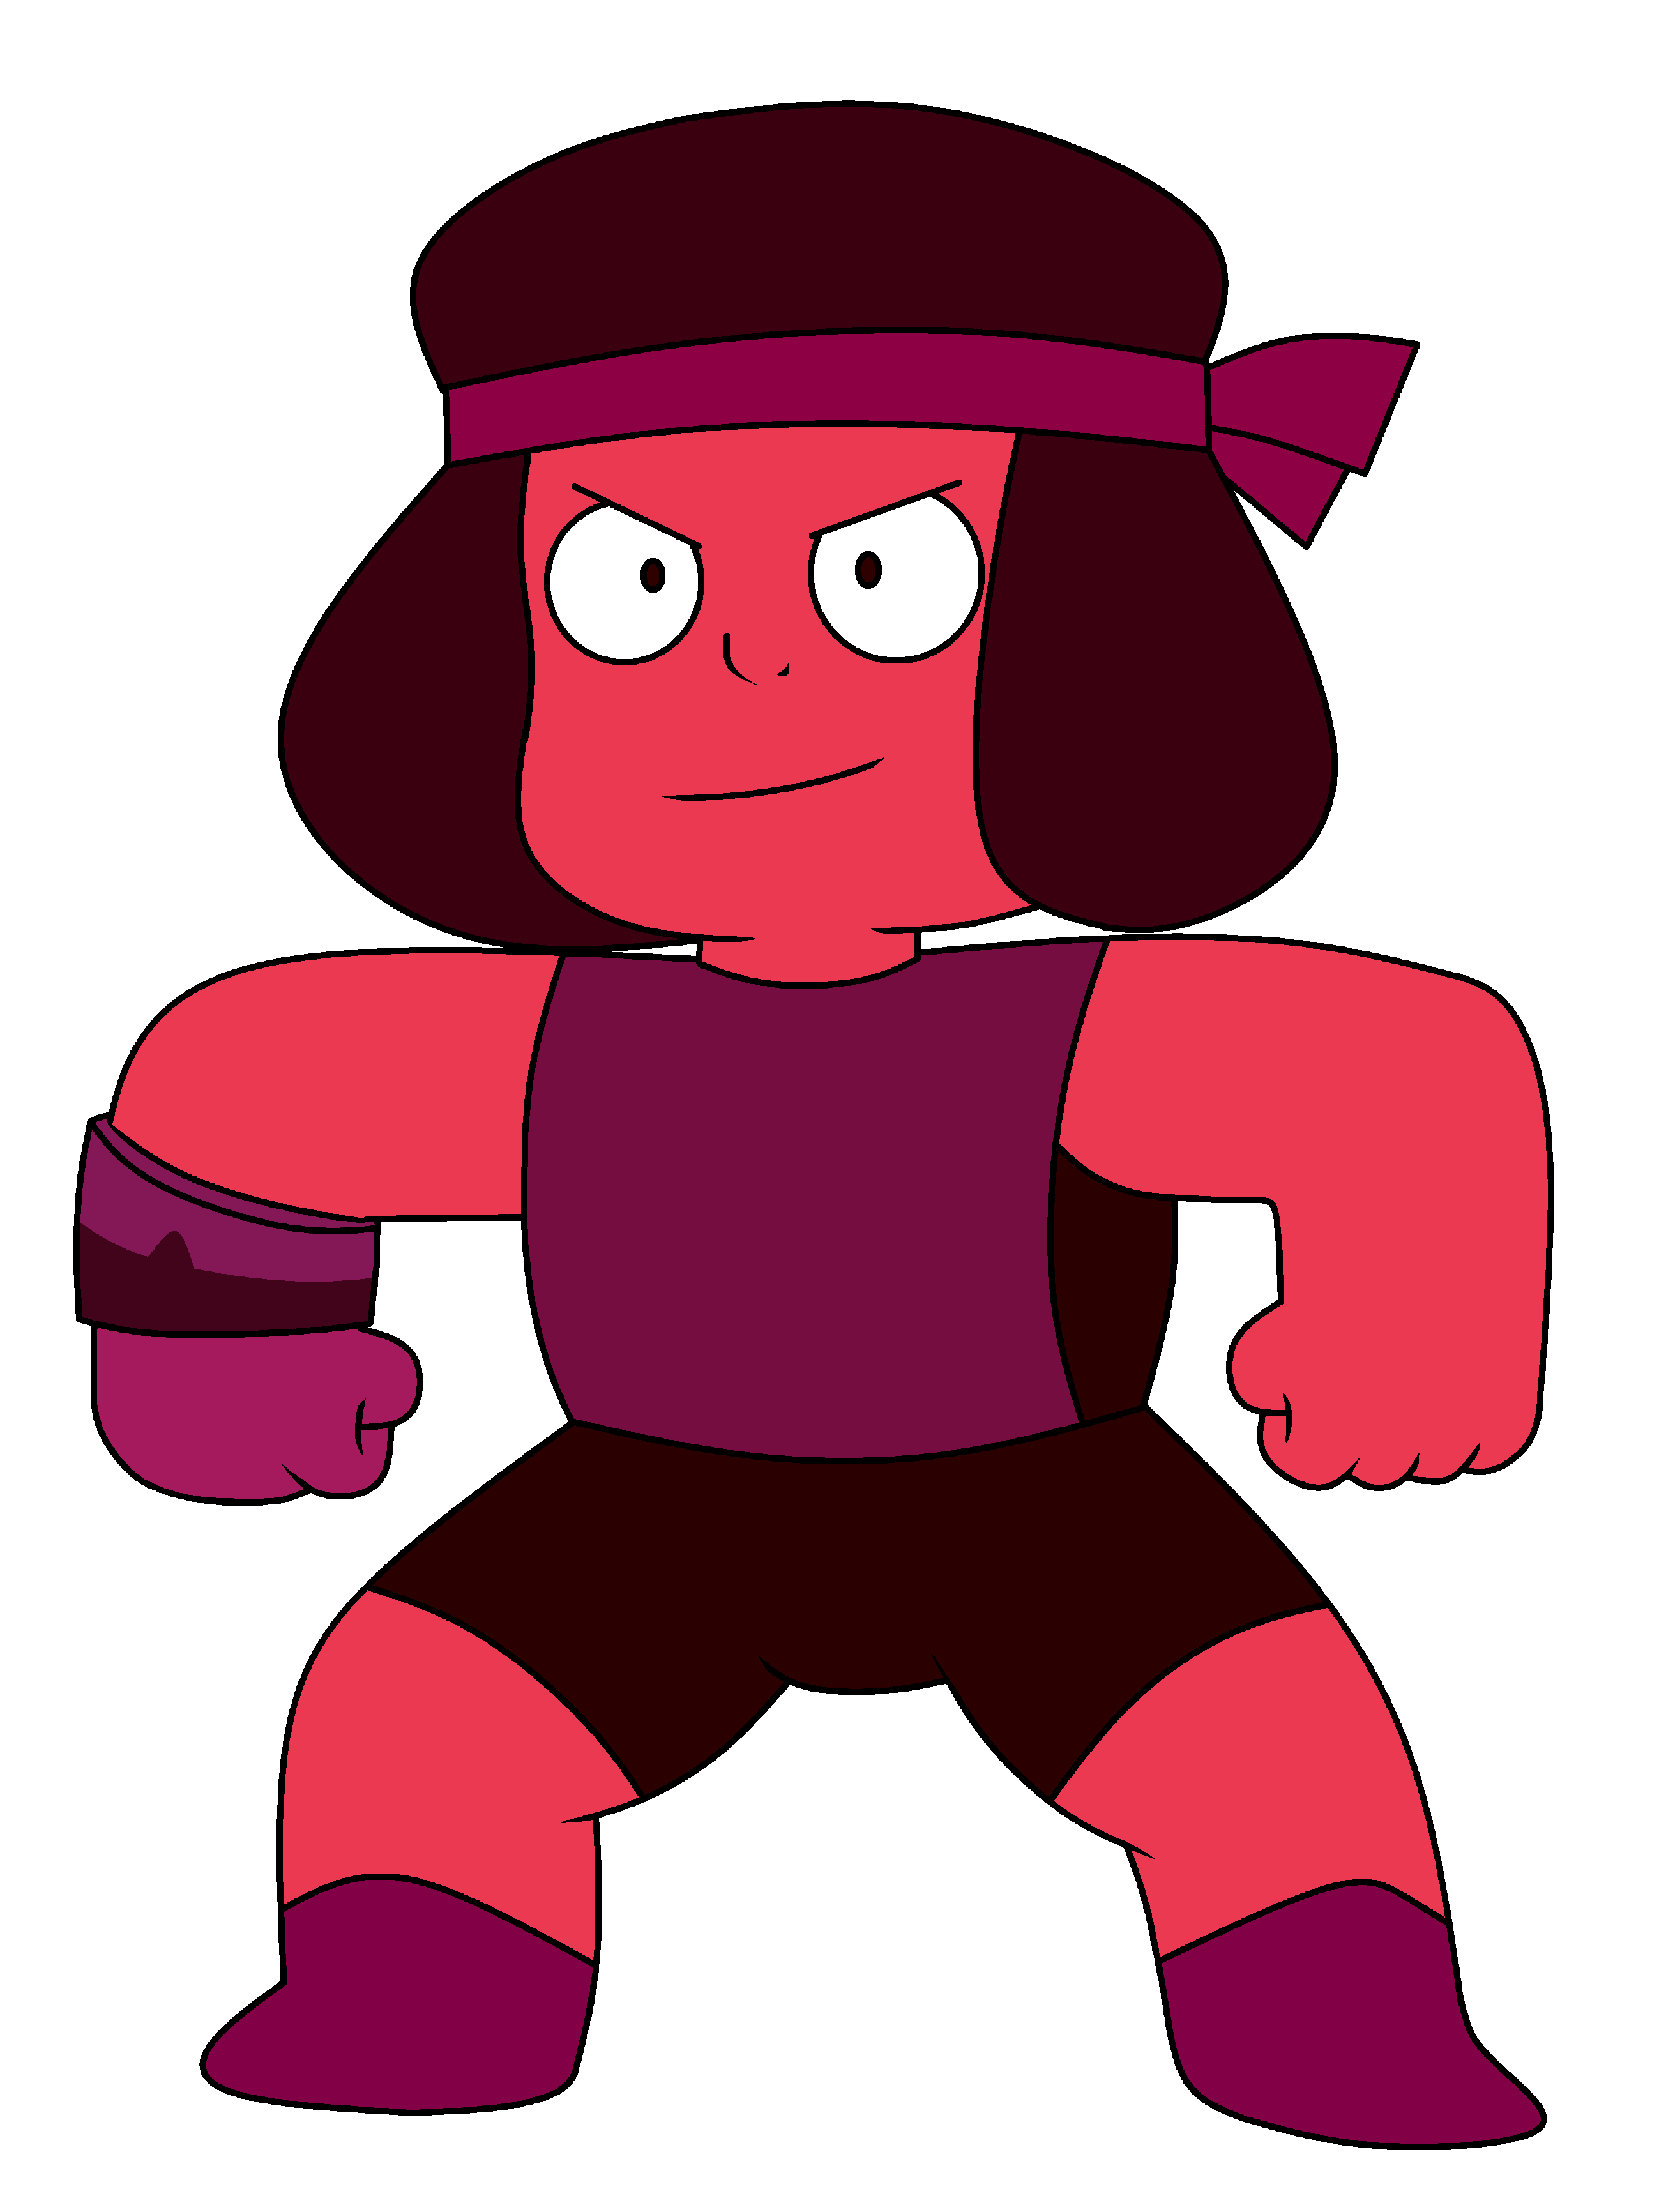 Ruby_-_Weaponized.png